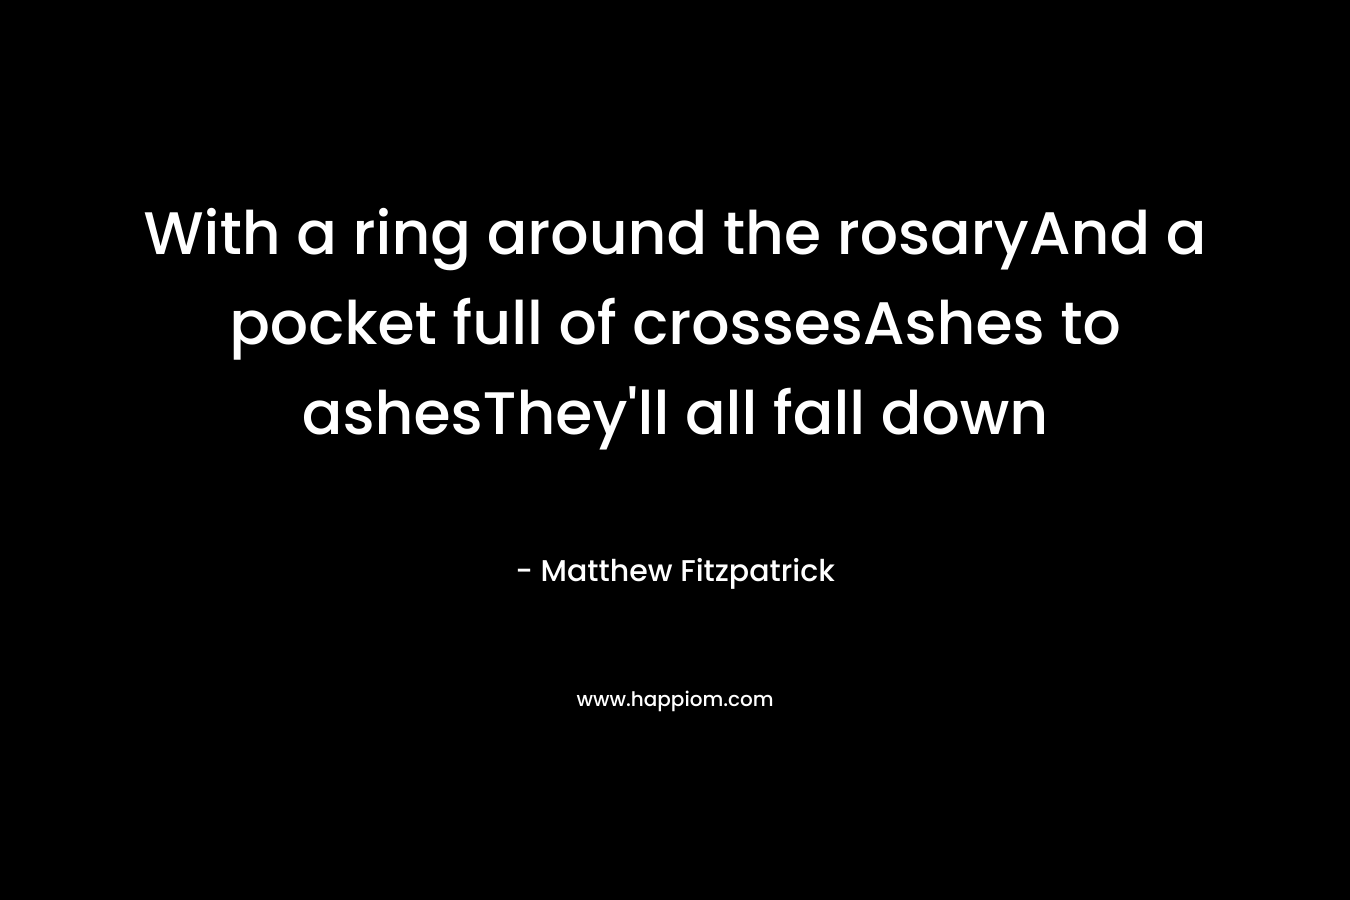 With a ring around the rosaryAnd a pocket full of crossesAshes to ashesThey’ll all fall down – Matthew Fitzpatrick